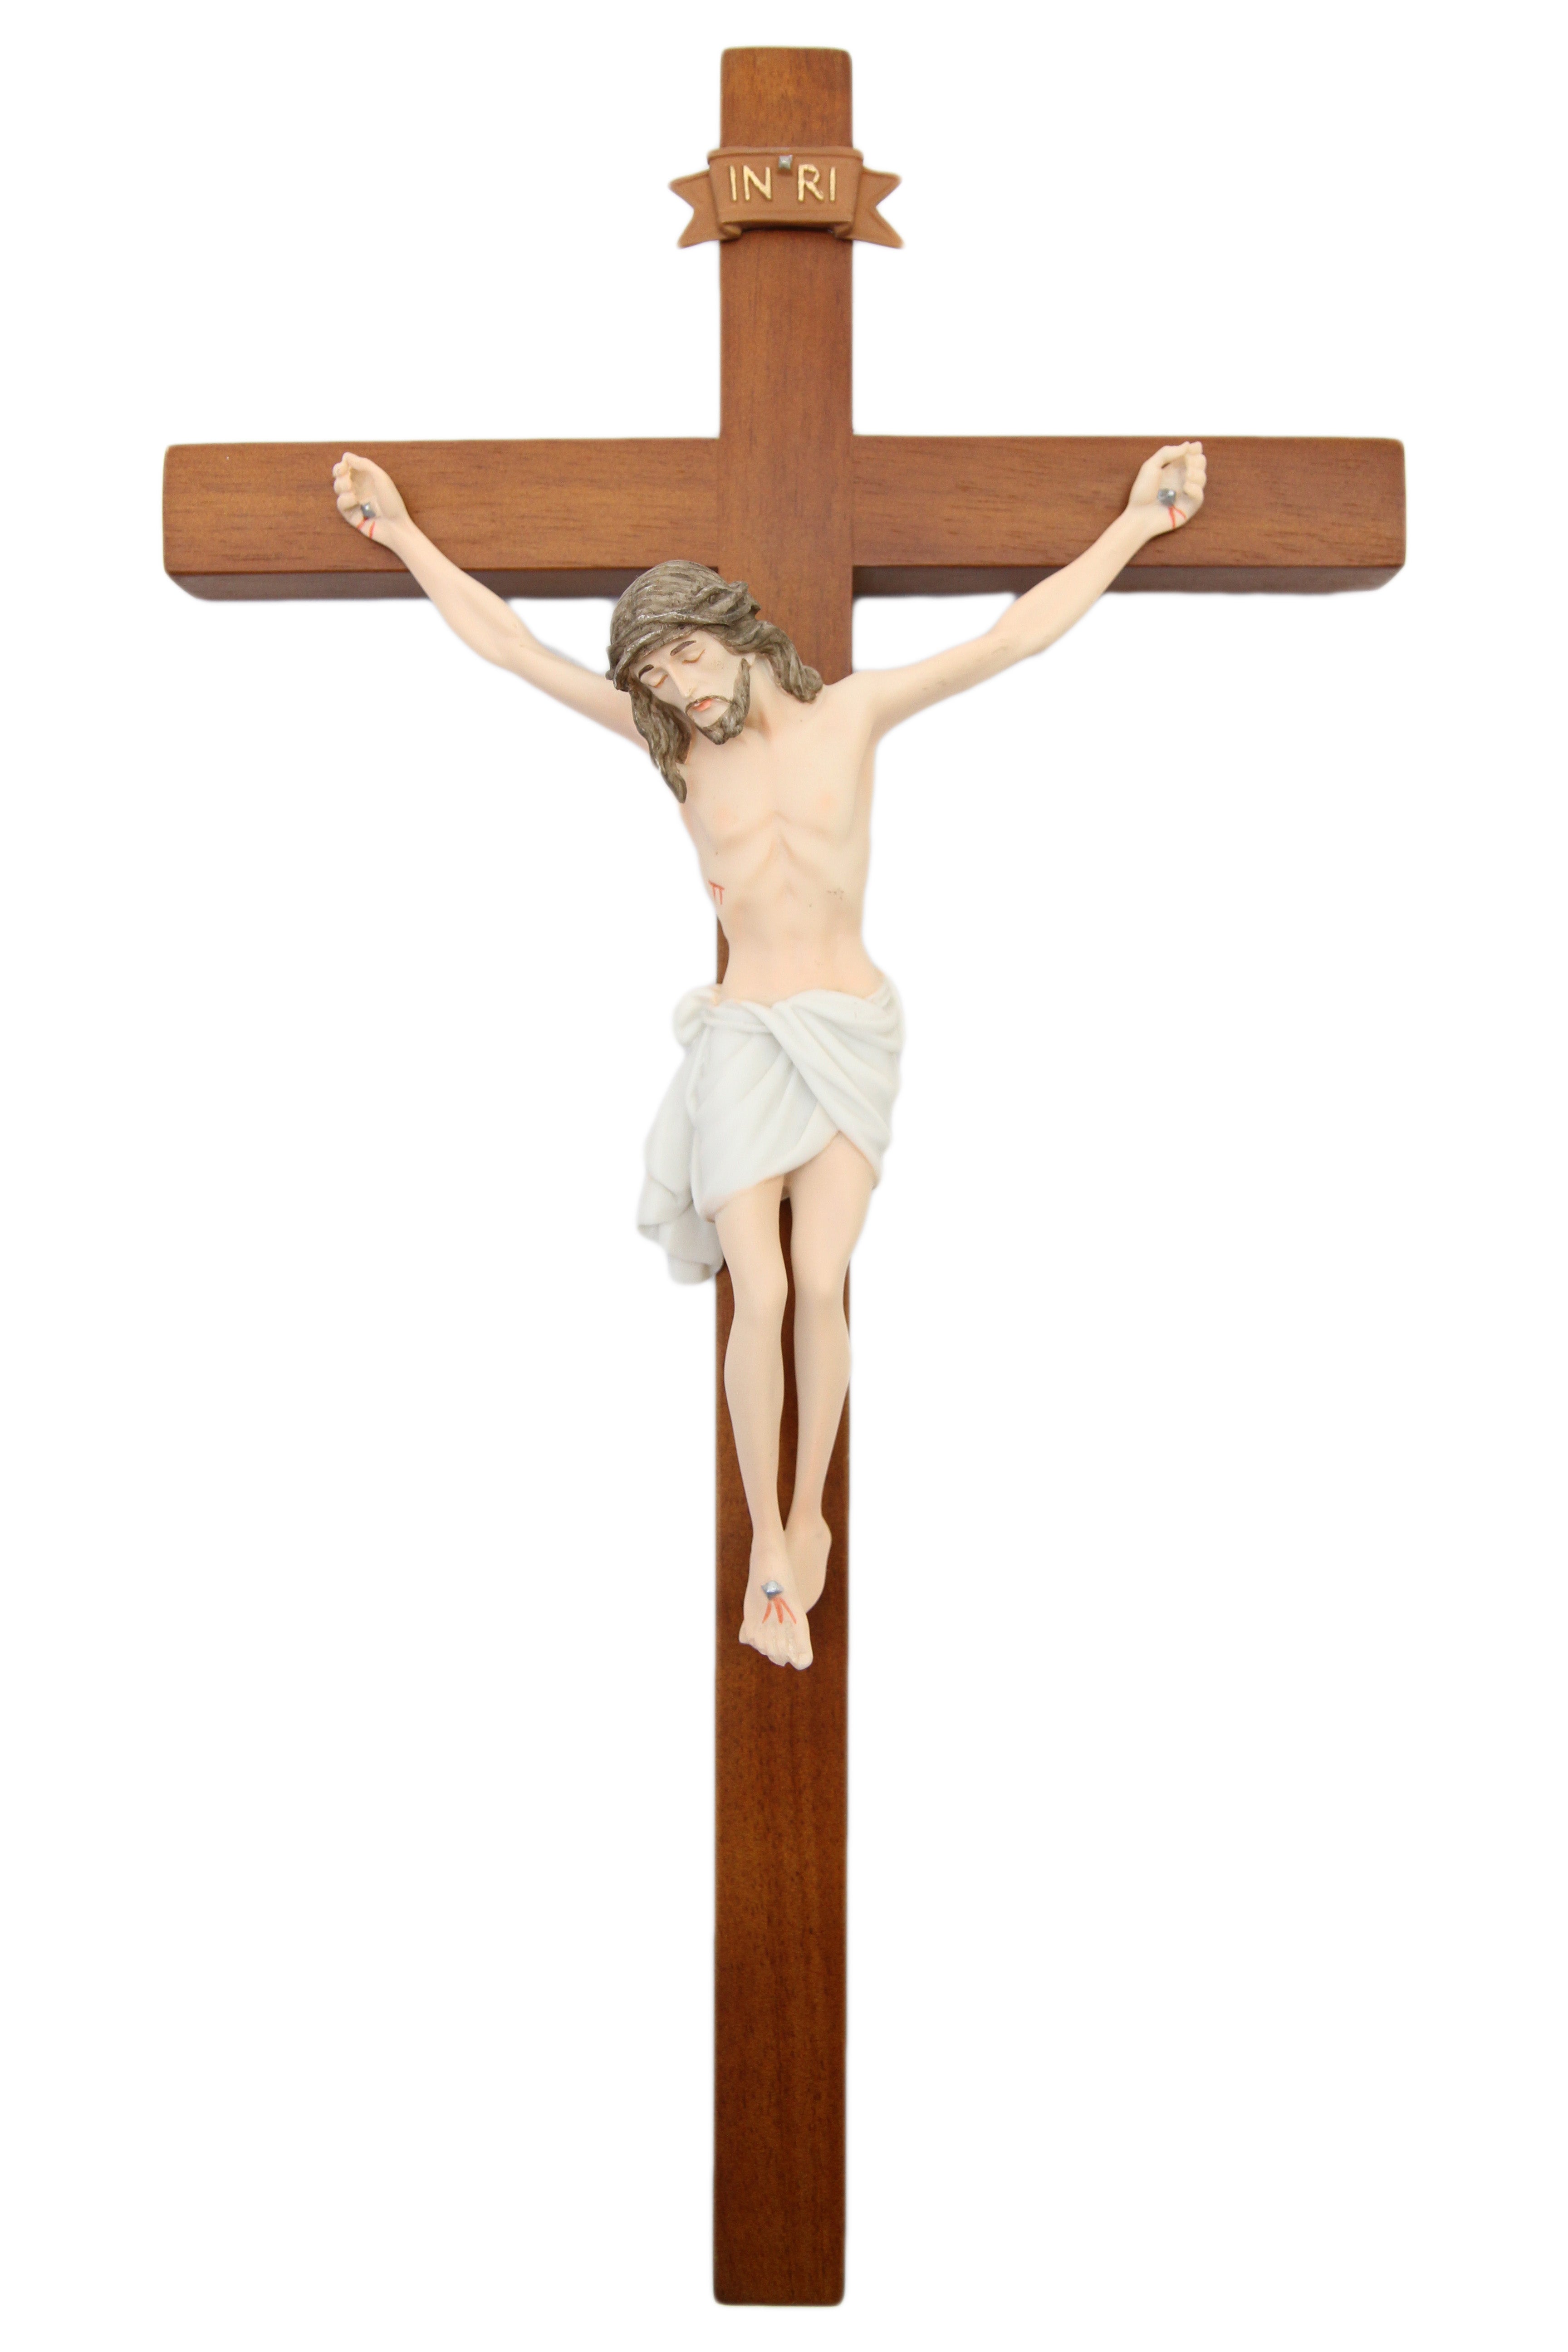 17 Inch Wall Hanging Crucifix Cross Jesus Statue Catholic Vittoria Made in Italy Wood Hand Painted